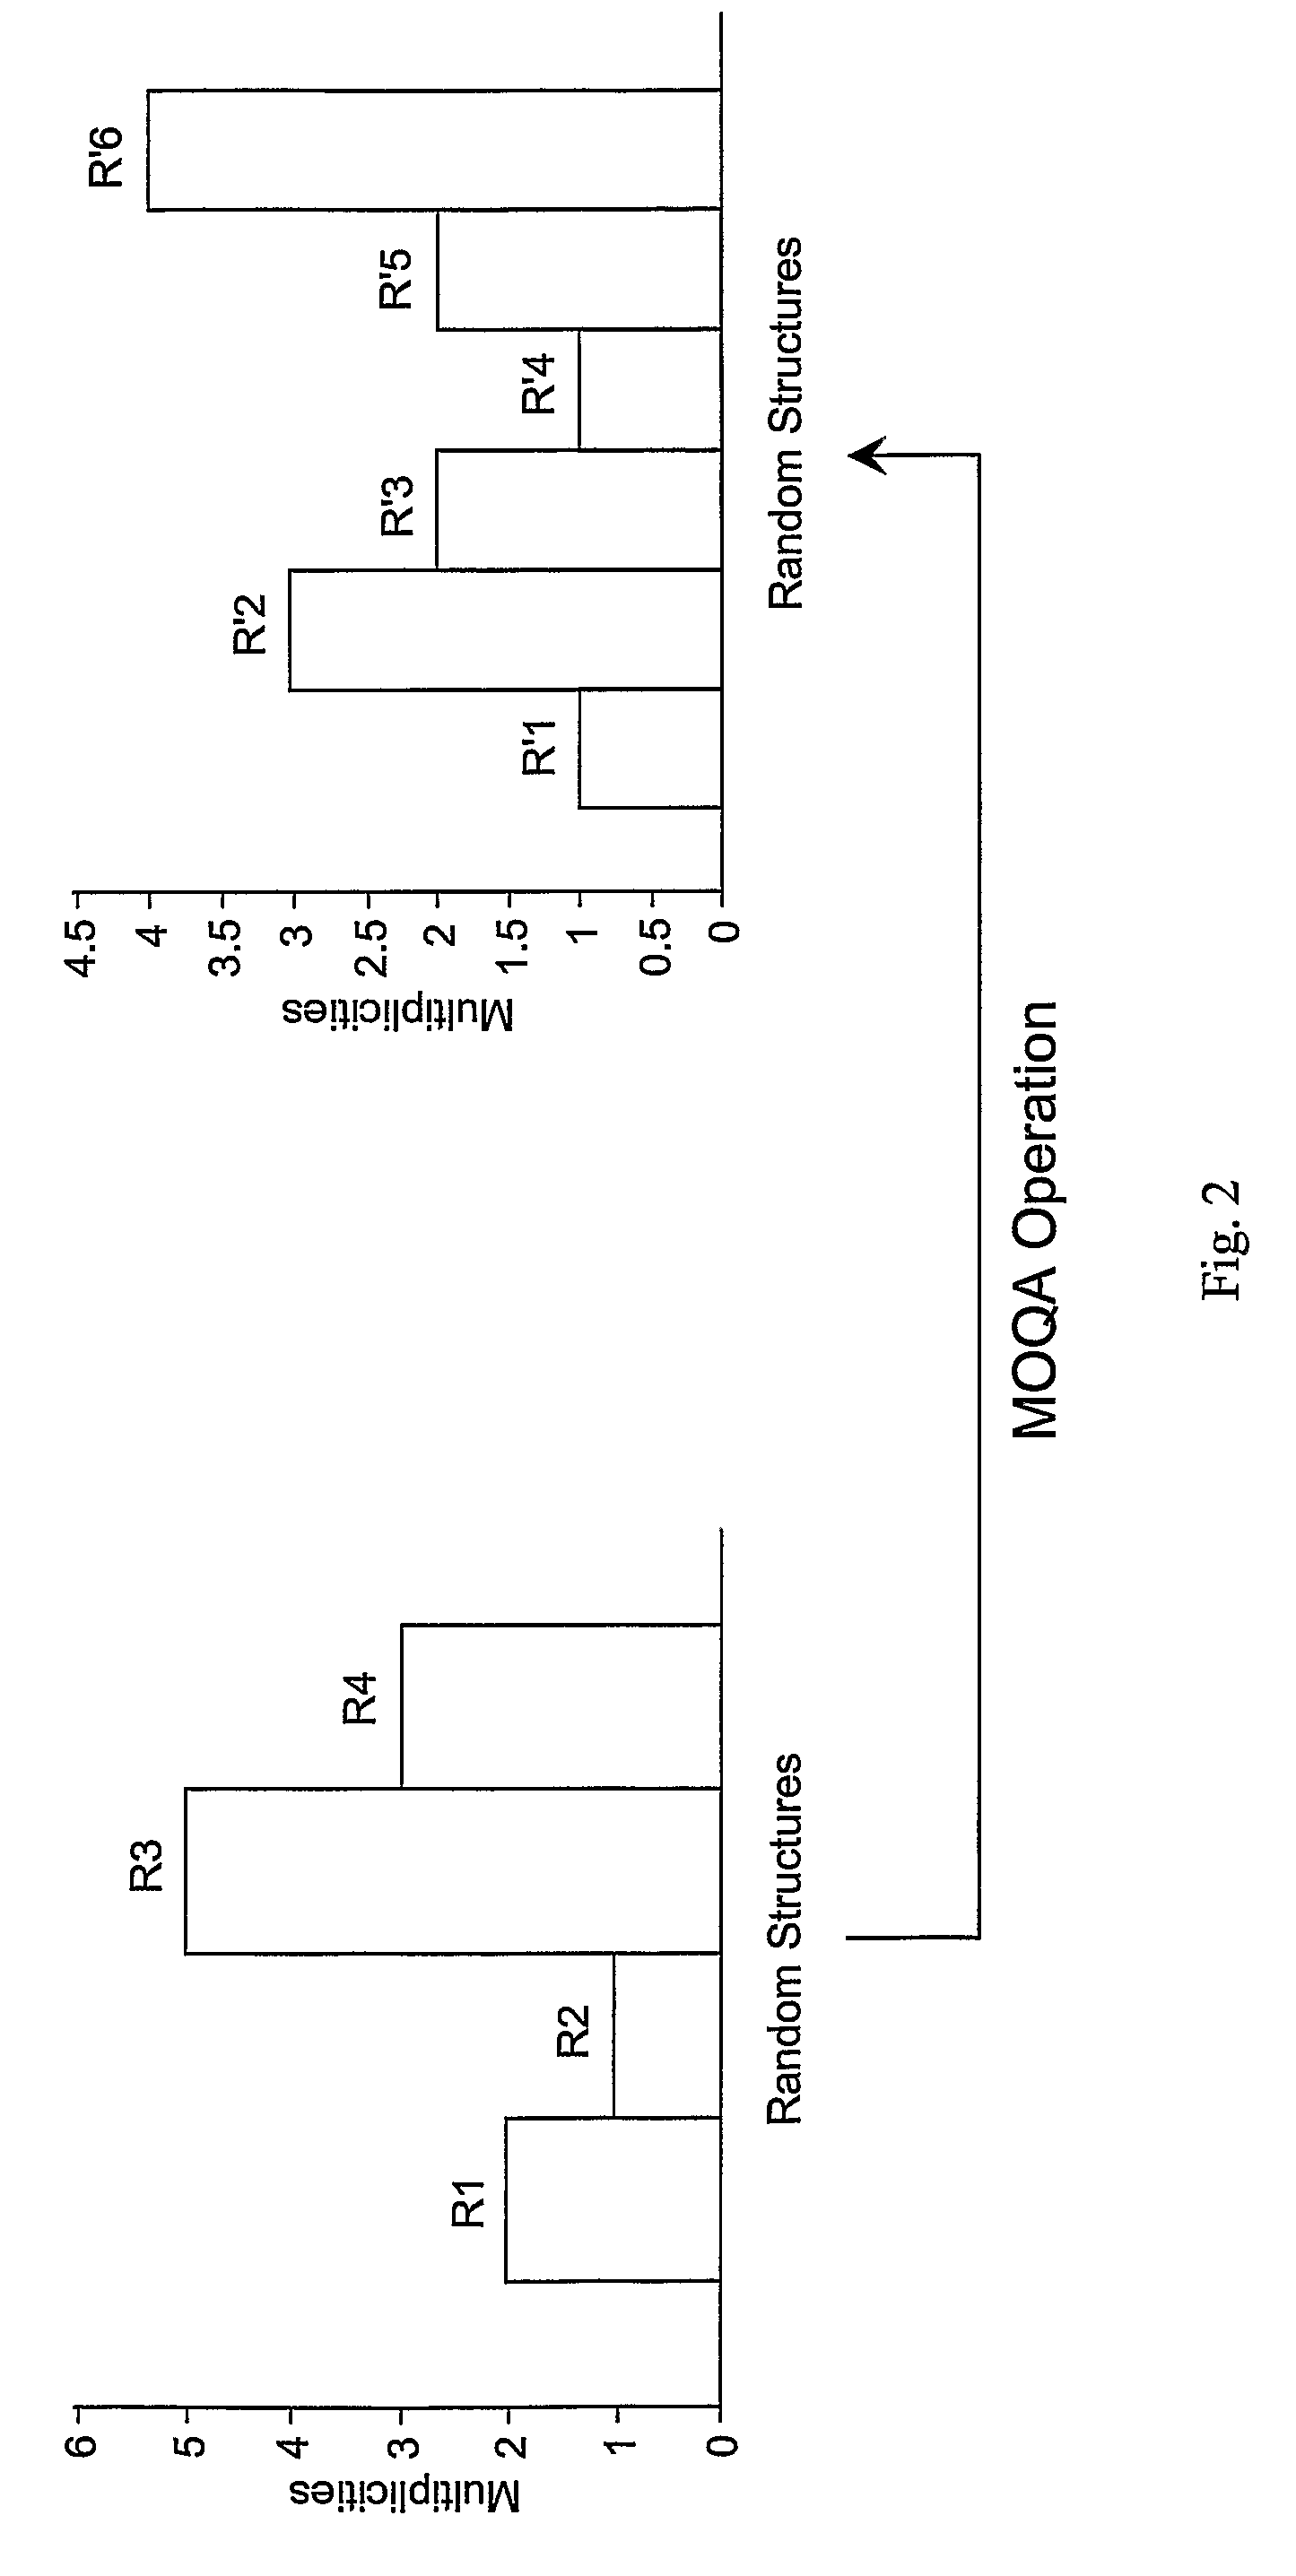 Method for developing software code and estimating processor execution time